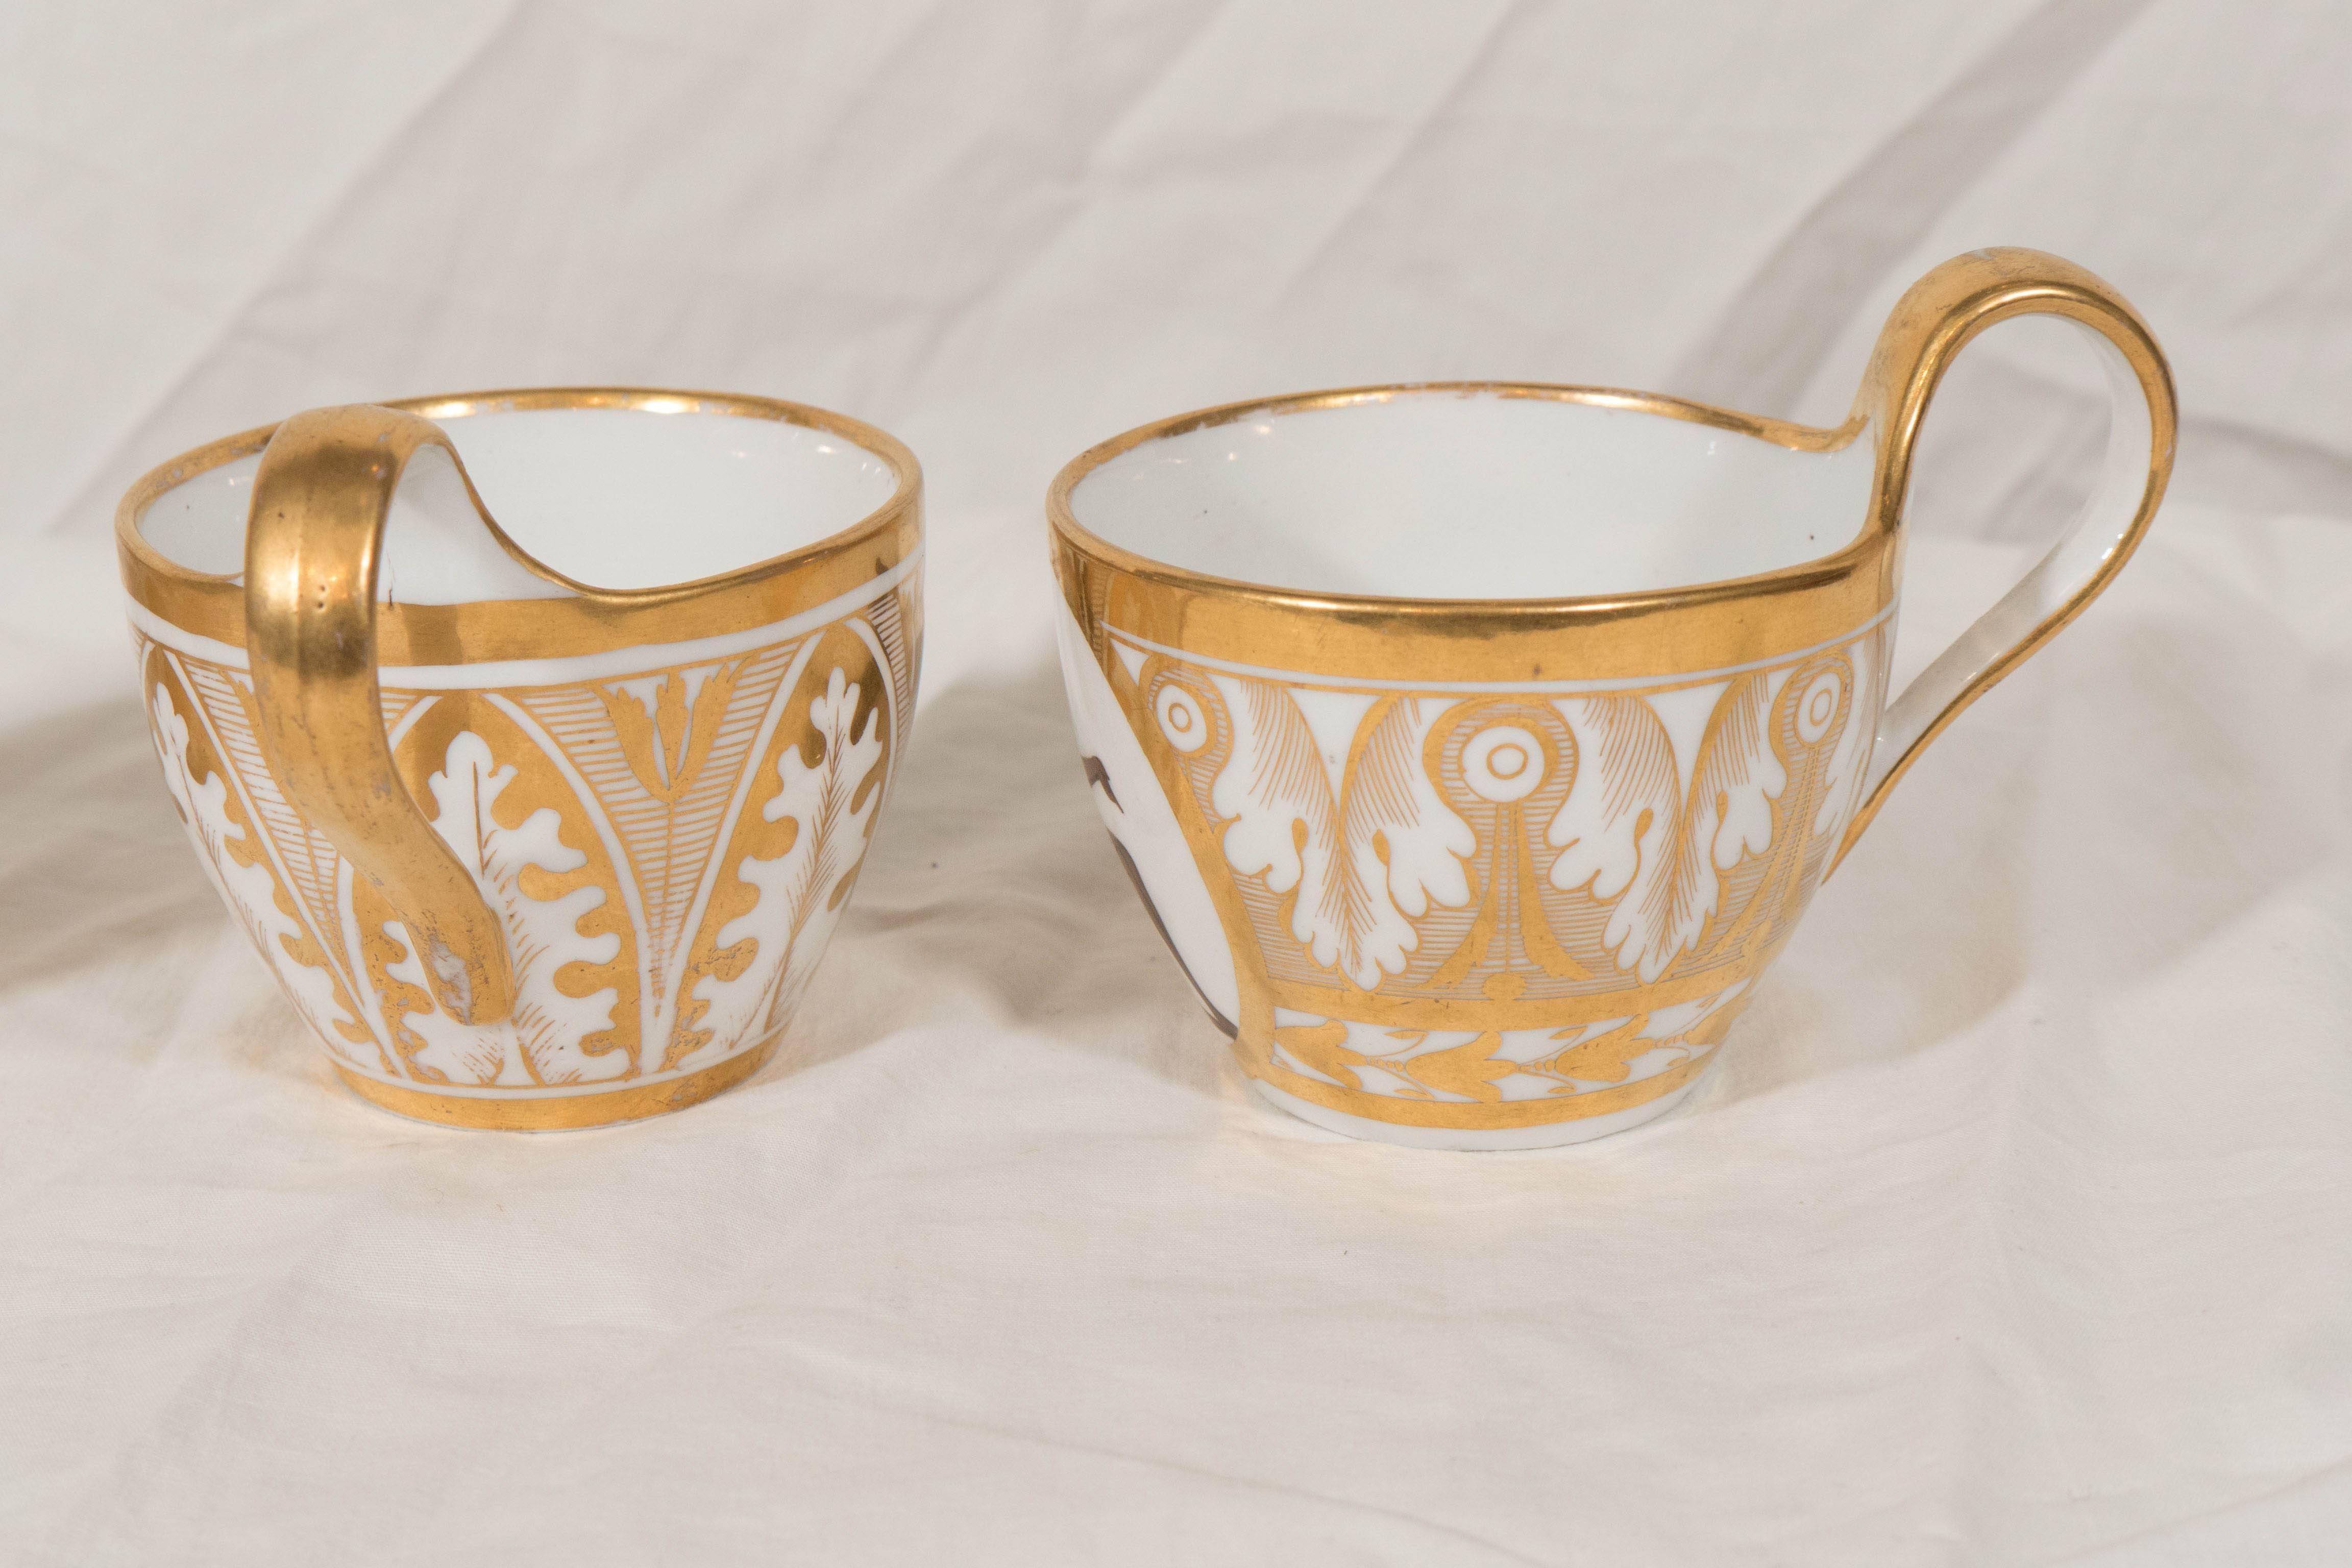  Antique Coalport Porcelain Cups and Saucers Neoclassical White and Gold  2